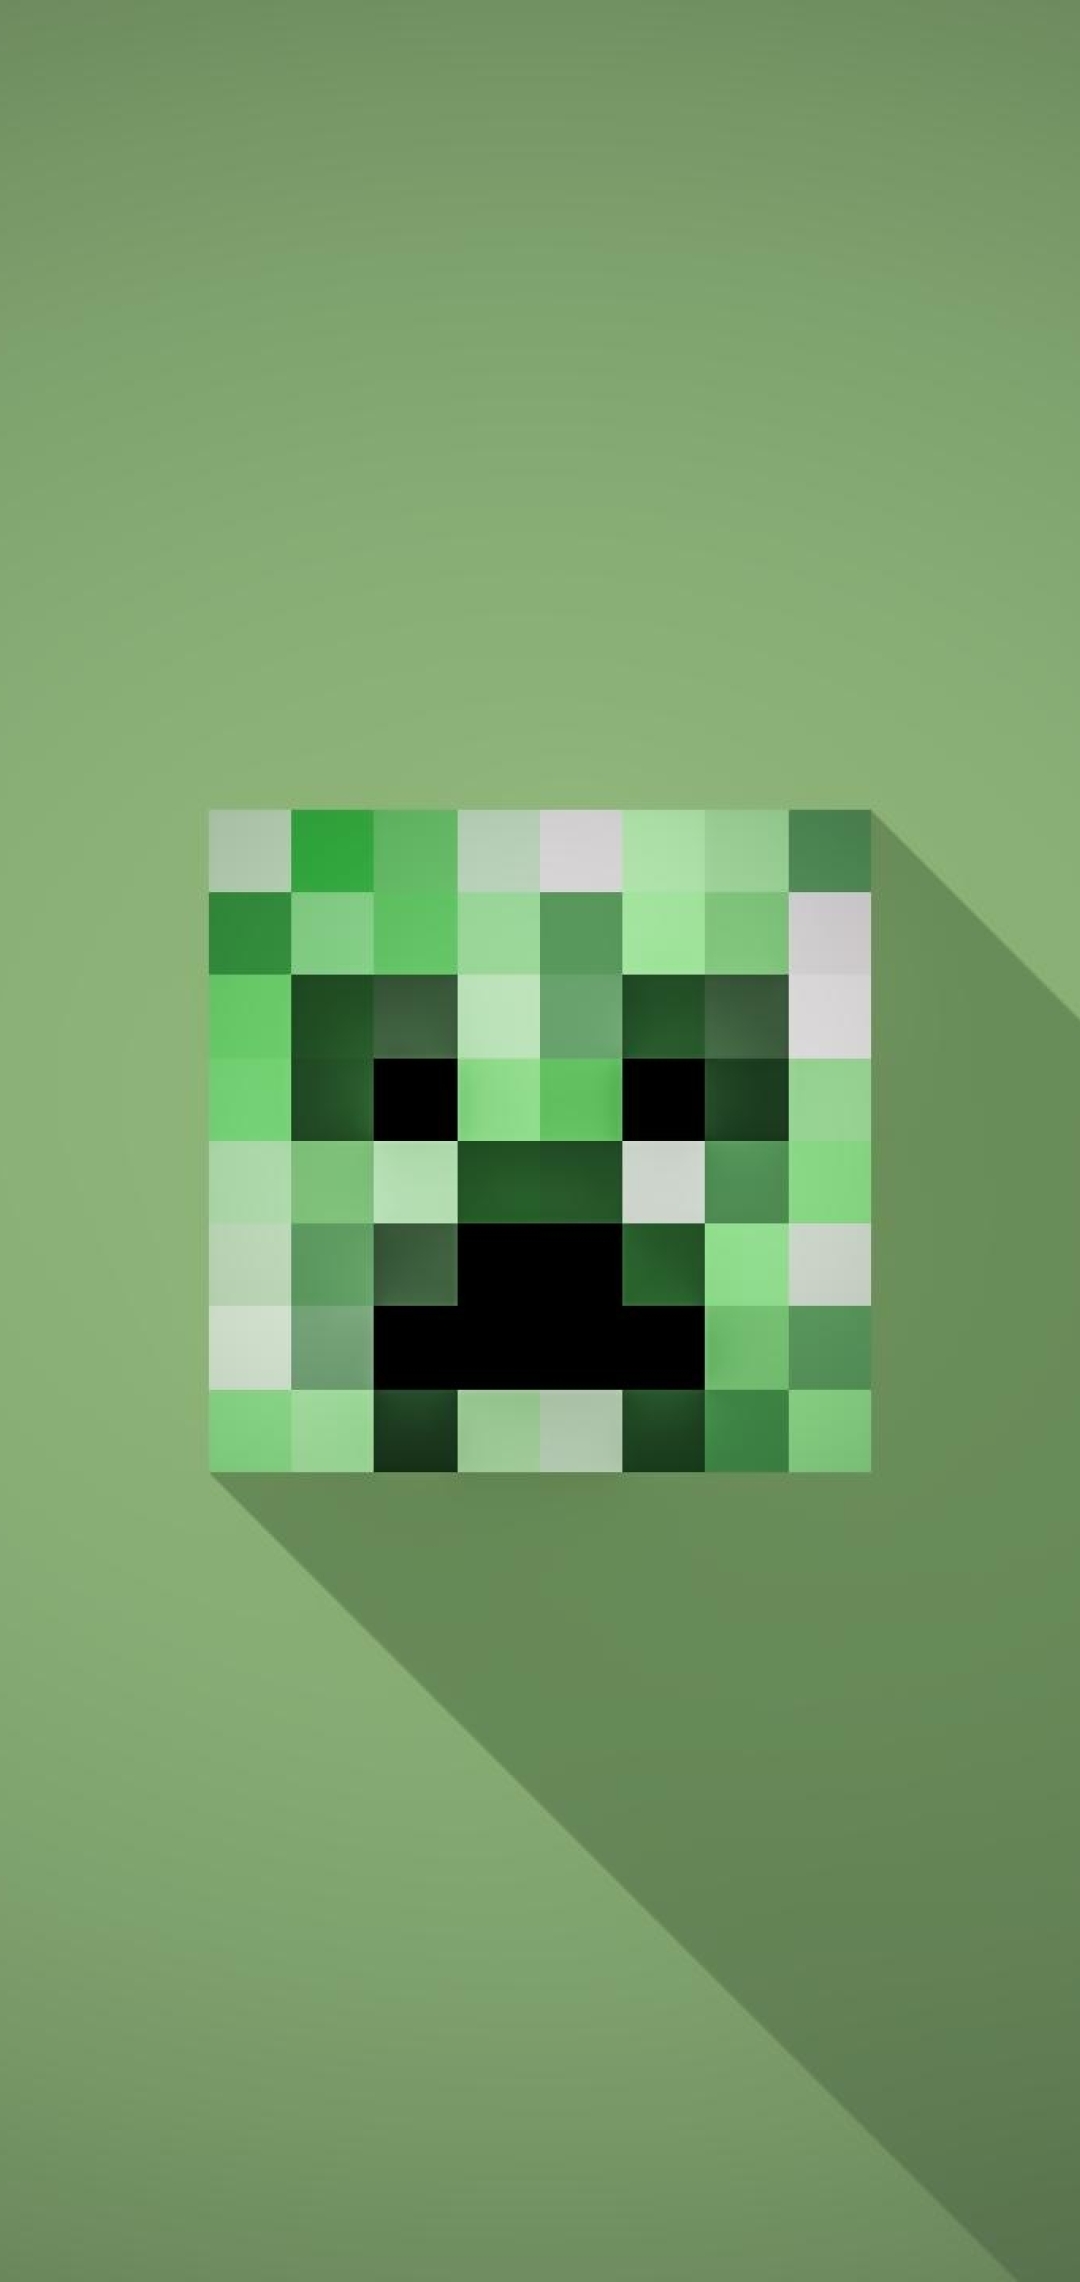 1080x22 Minecraft Minimalist Creeper 1080x22 Resolution Wallpaper Hd Minimalist 4k Wallpapers Images Photos And Background Wallpapers Den